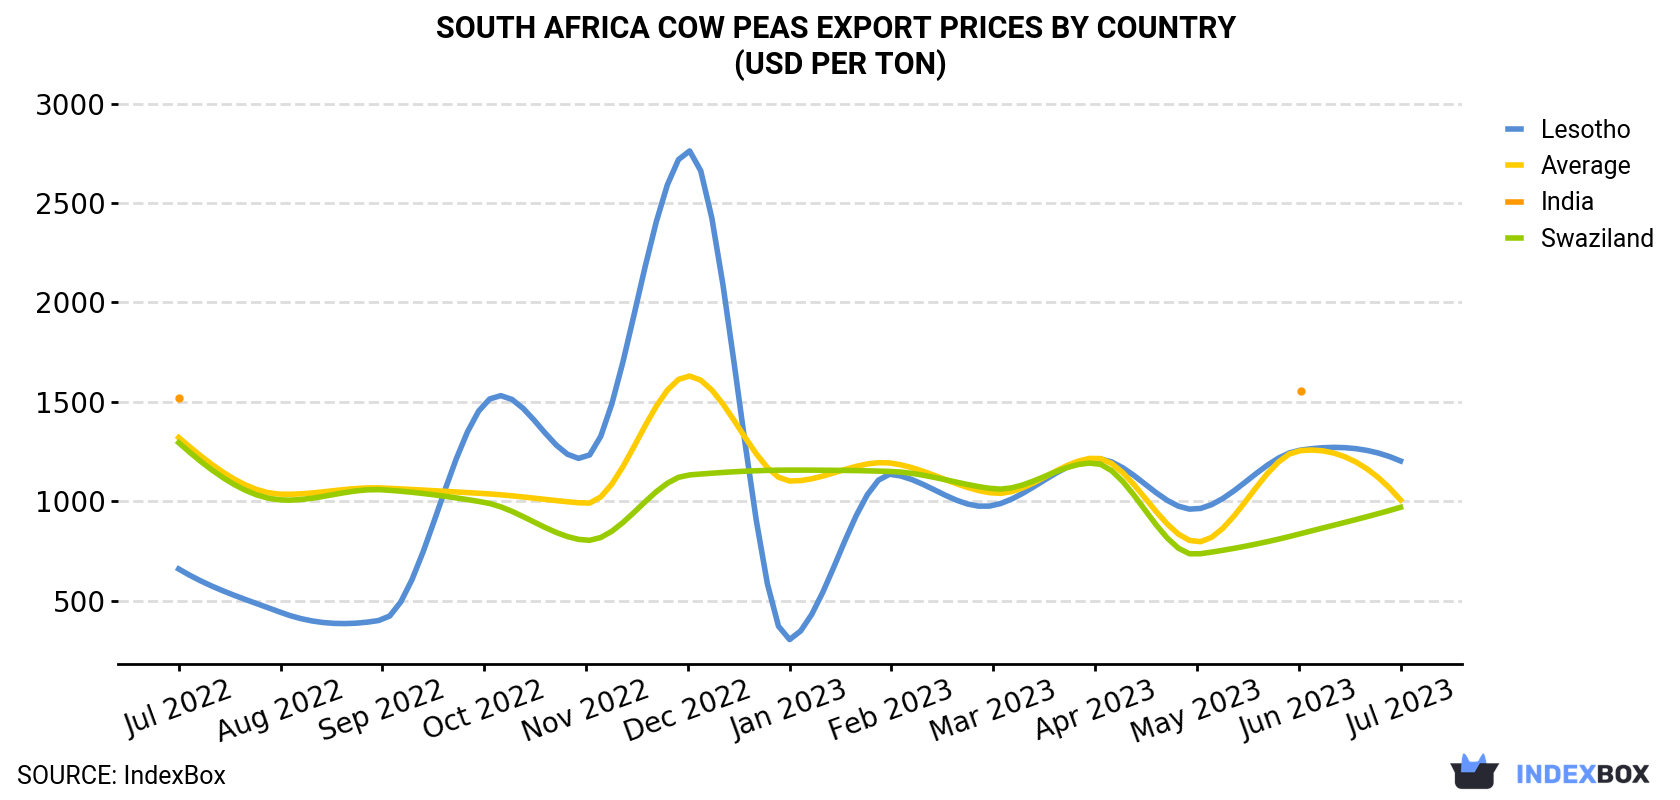 South Africa Cow Peas Export Prices By Country (USD Per Ton)